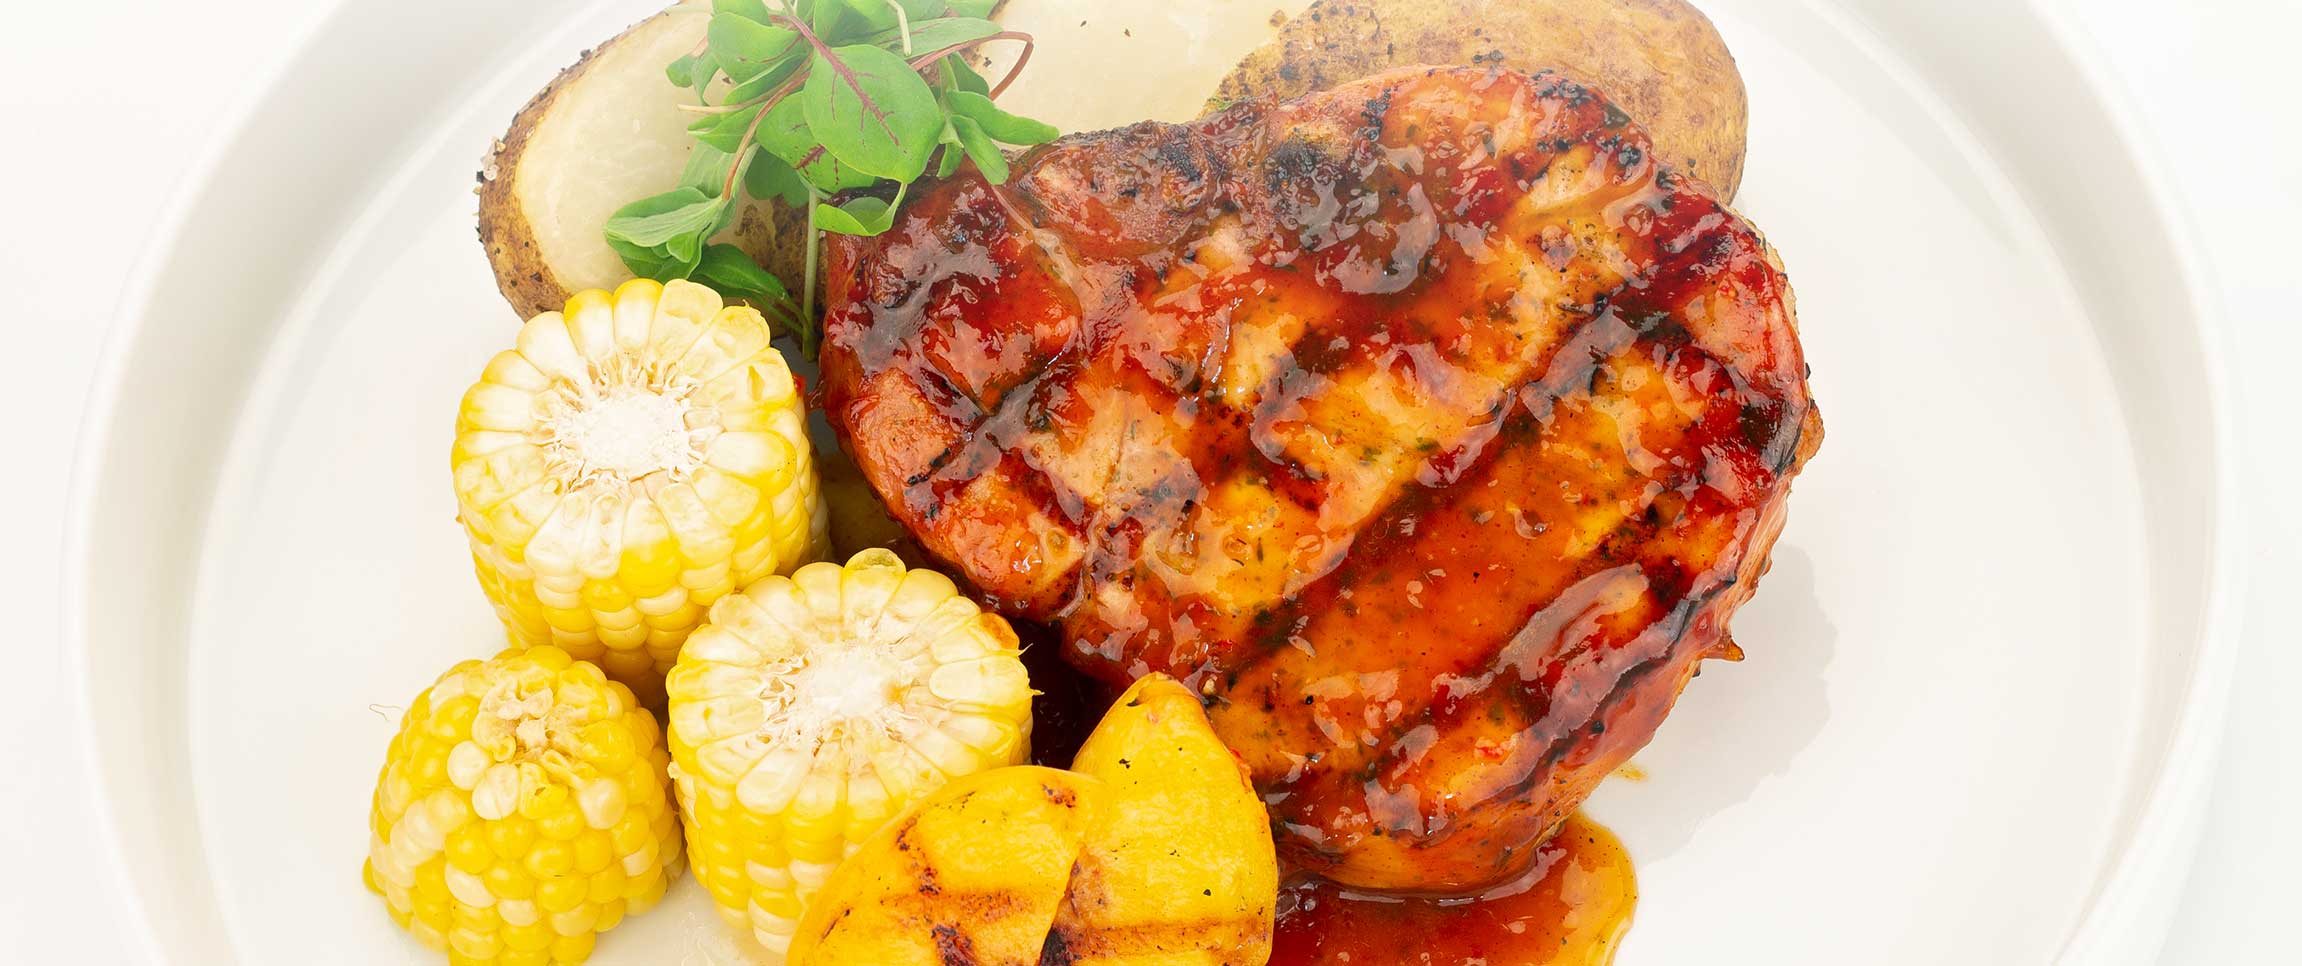 Grilled Pork Chops with Corn